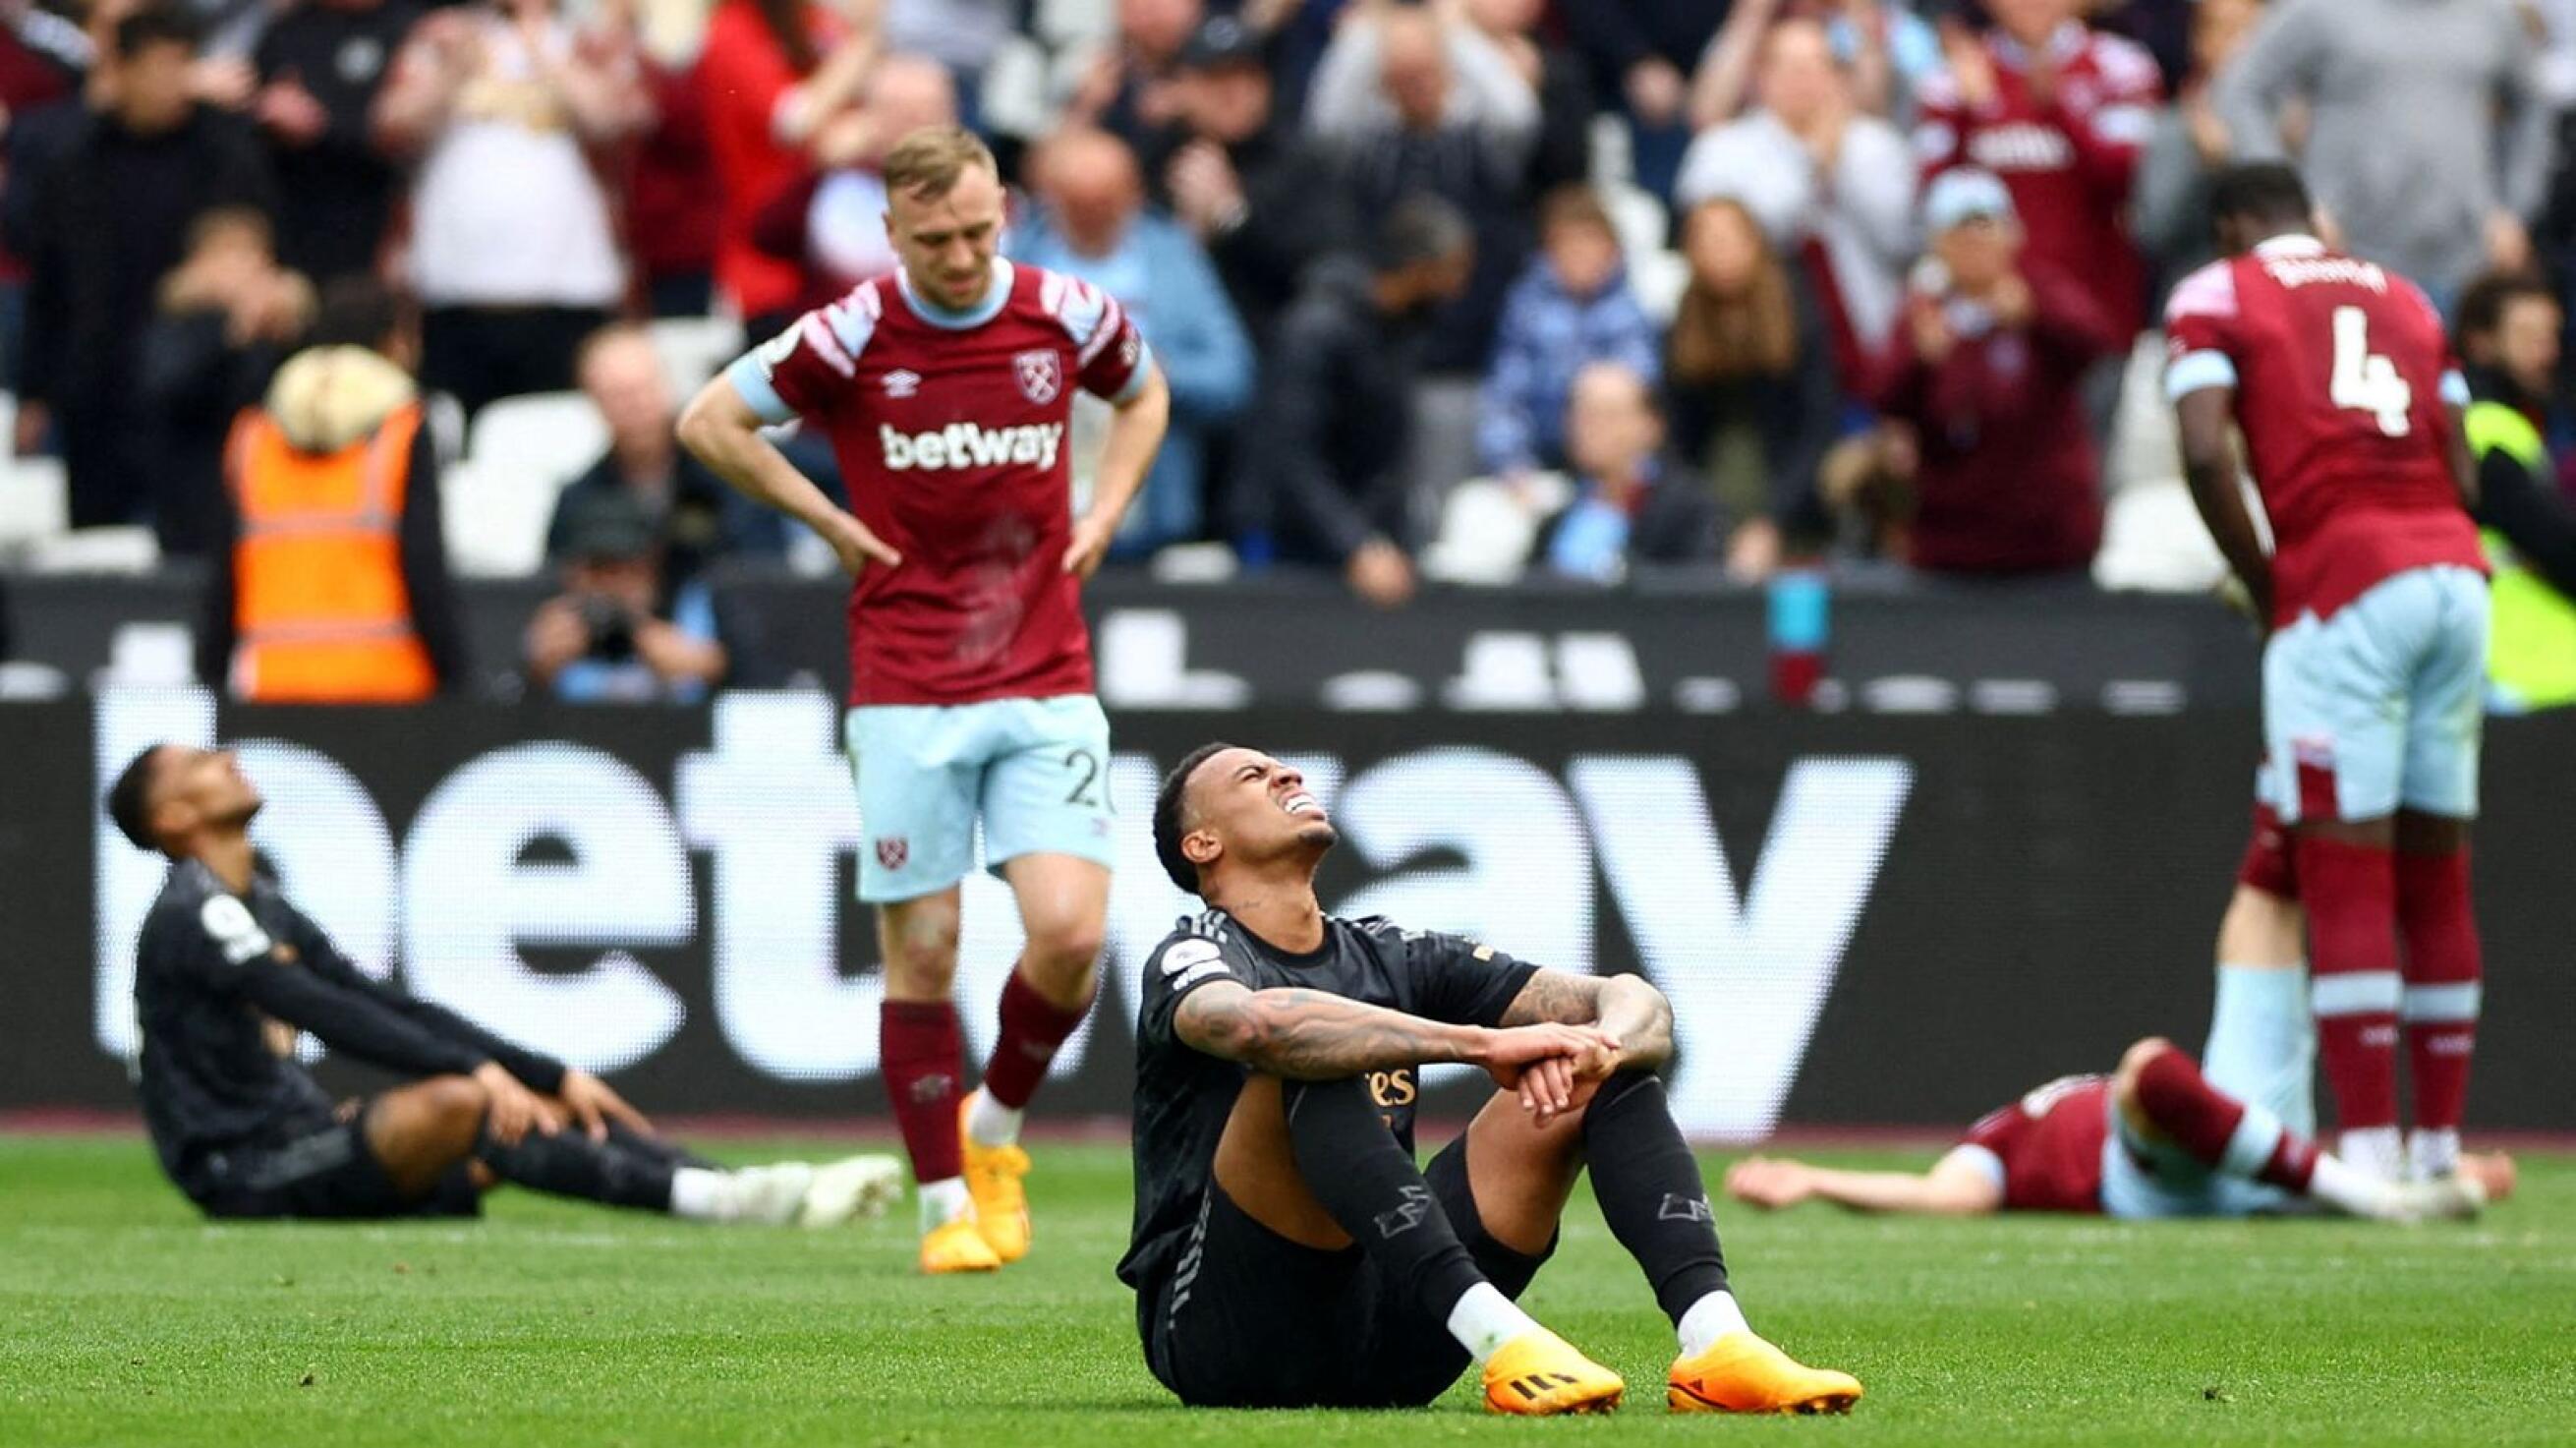 Arsenal's Gabriel looks dejected after their Premier League match against West Ham United at the London Stadium on Sunday